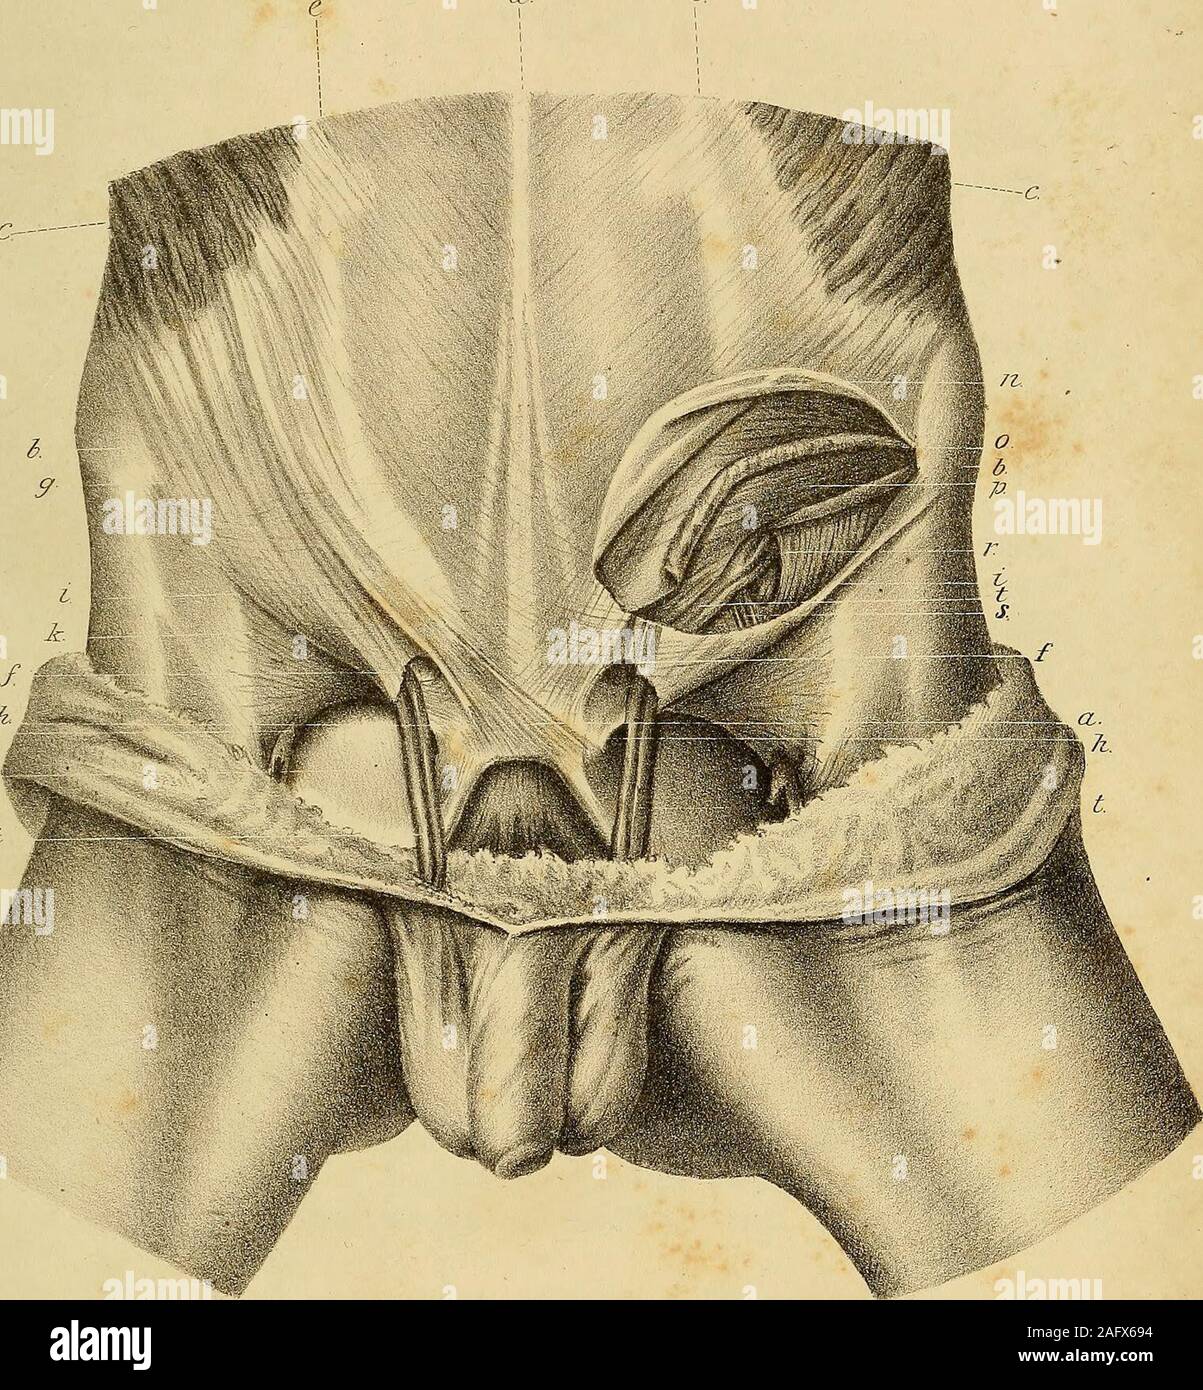 . The anatomy and surgical treatment of abdominal hernia. ansversalis, and by the epigastric artery,A portion of the fascia is fixed in the pubes, and another part of itpasses behind Pouparts ligament to unite with the femoral ves-sels. r. The place at which the spermatic cord goes into the abdomen. The fascia situated on its outer side and lower part, is of consi-derable density, but becoming thin upon its inner side, so as toshow the epigastric artery and vein behind it; from the edge ofthe fascia a thin layer is sent off which unites itself to the sper-matic cord, which fascia in this disse Stock Photo